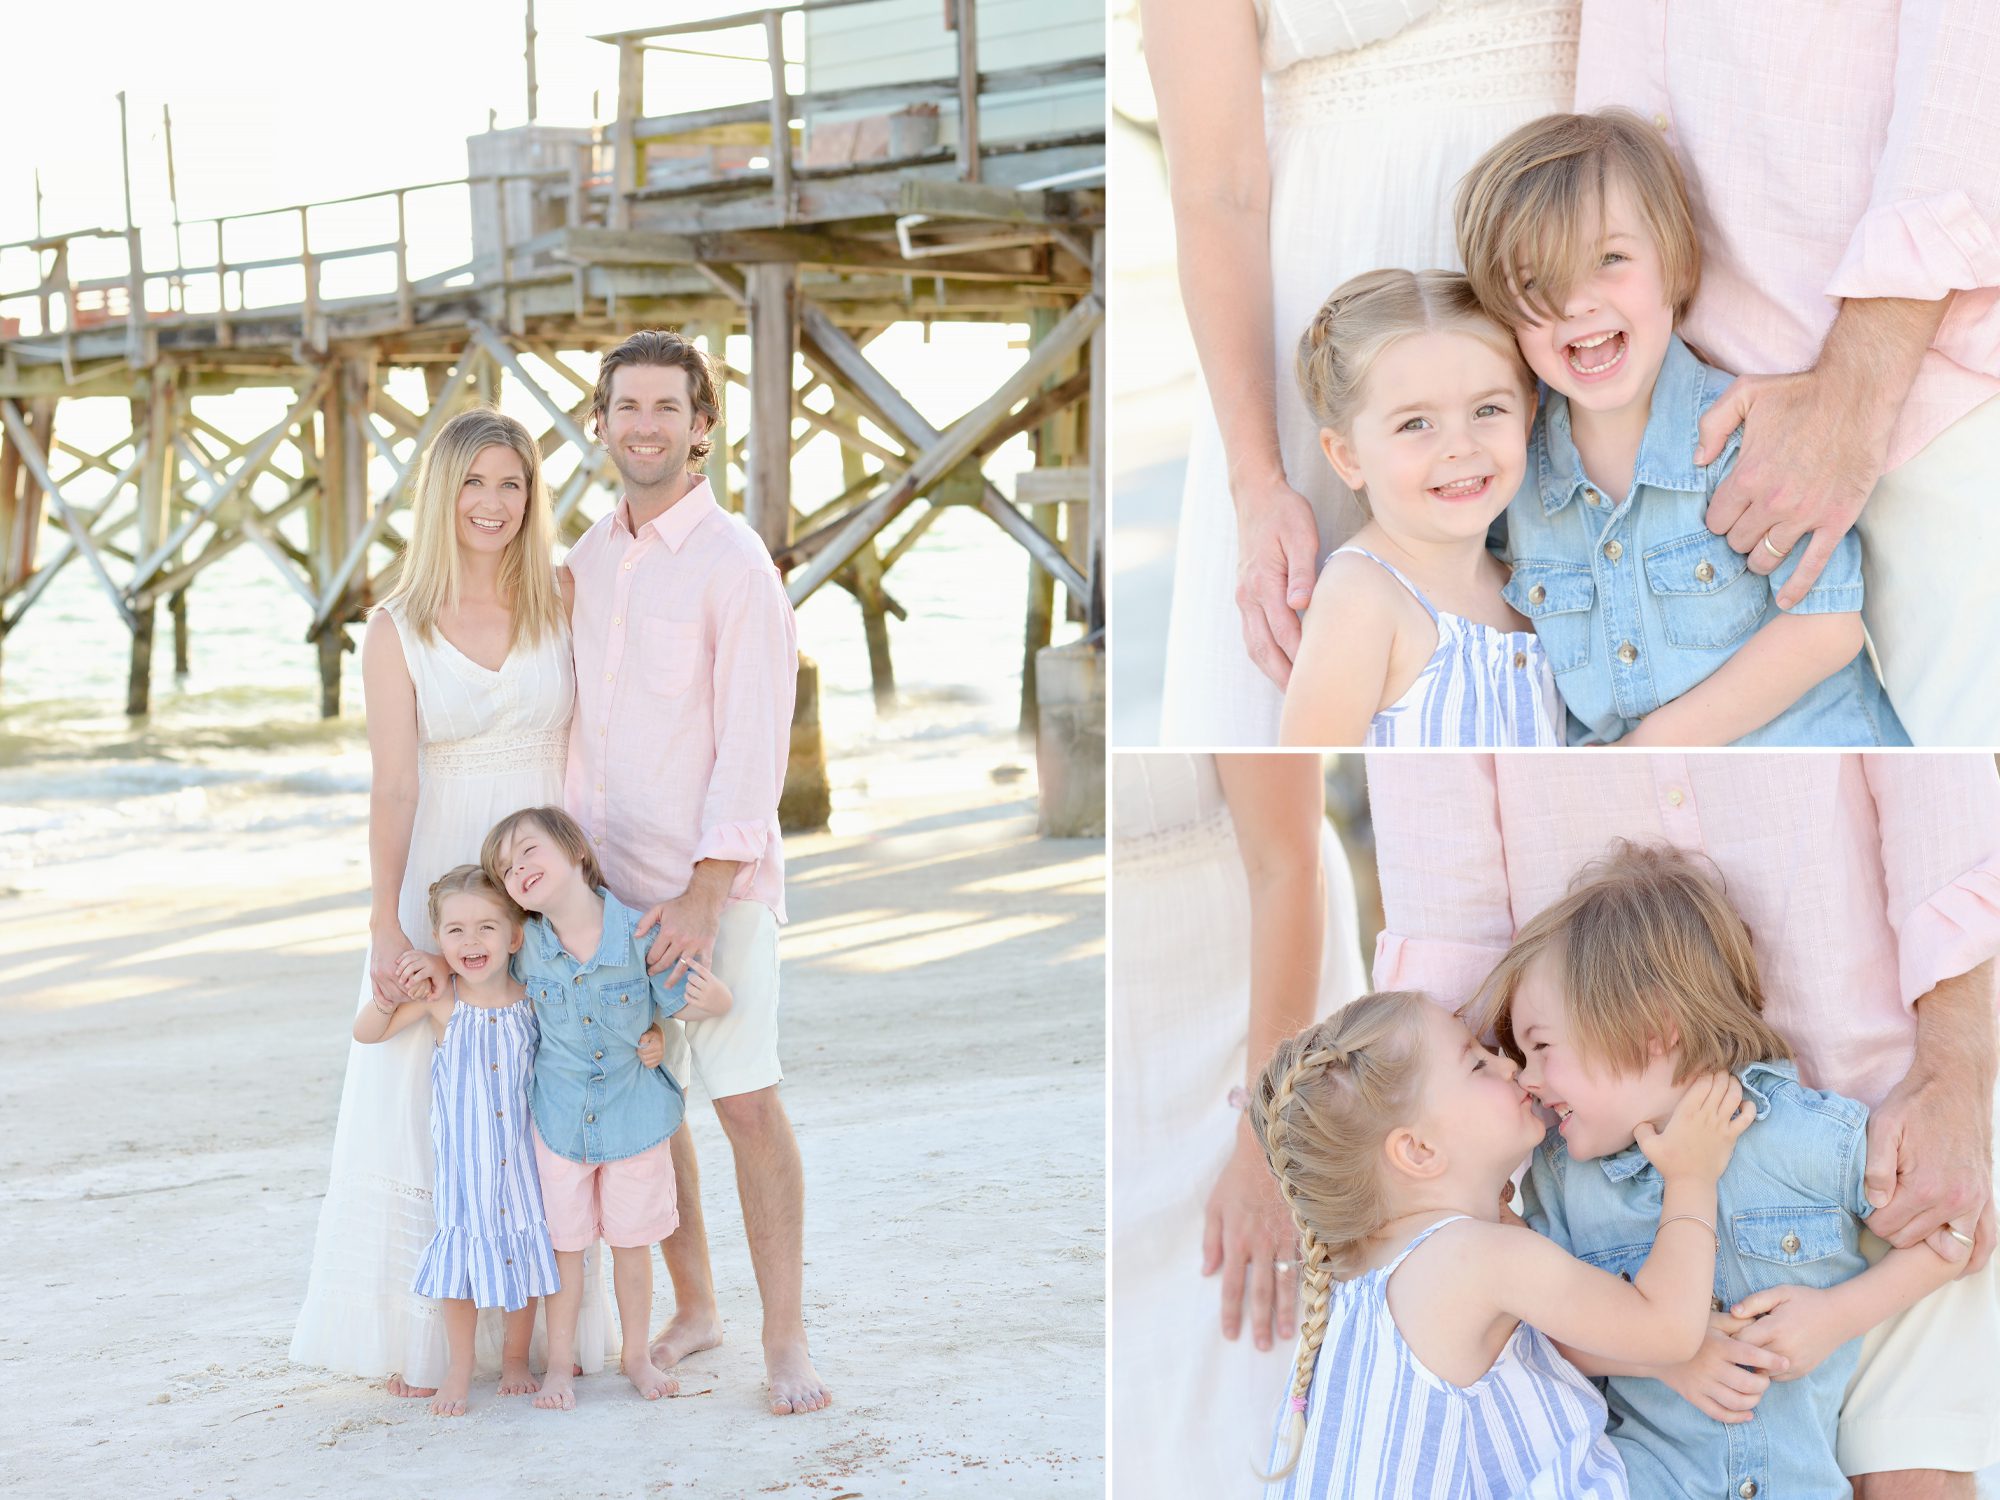 Family of 4 at Redington Shores Beach, FL getting fun family beach portraits in front of a rustic wooden pier.